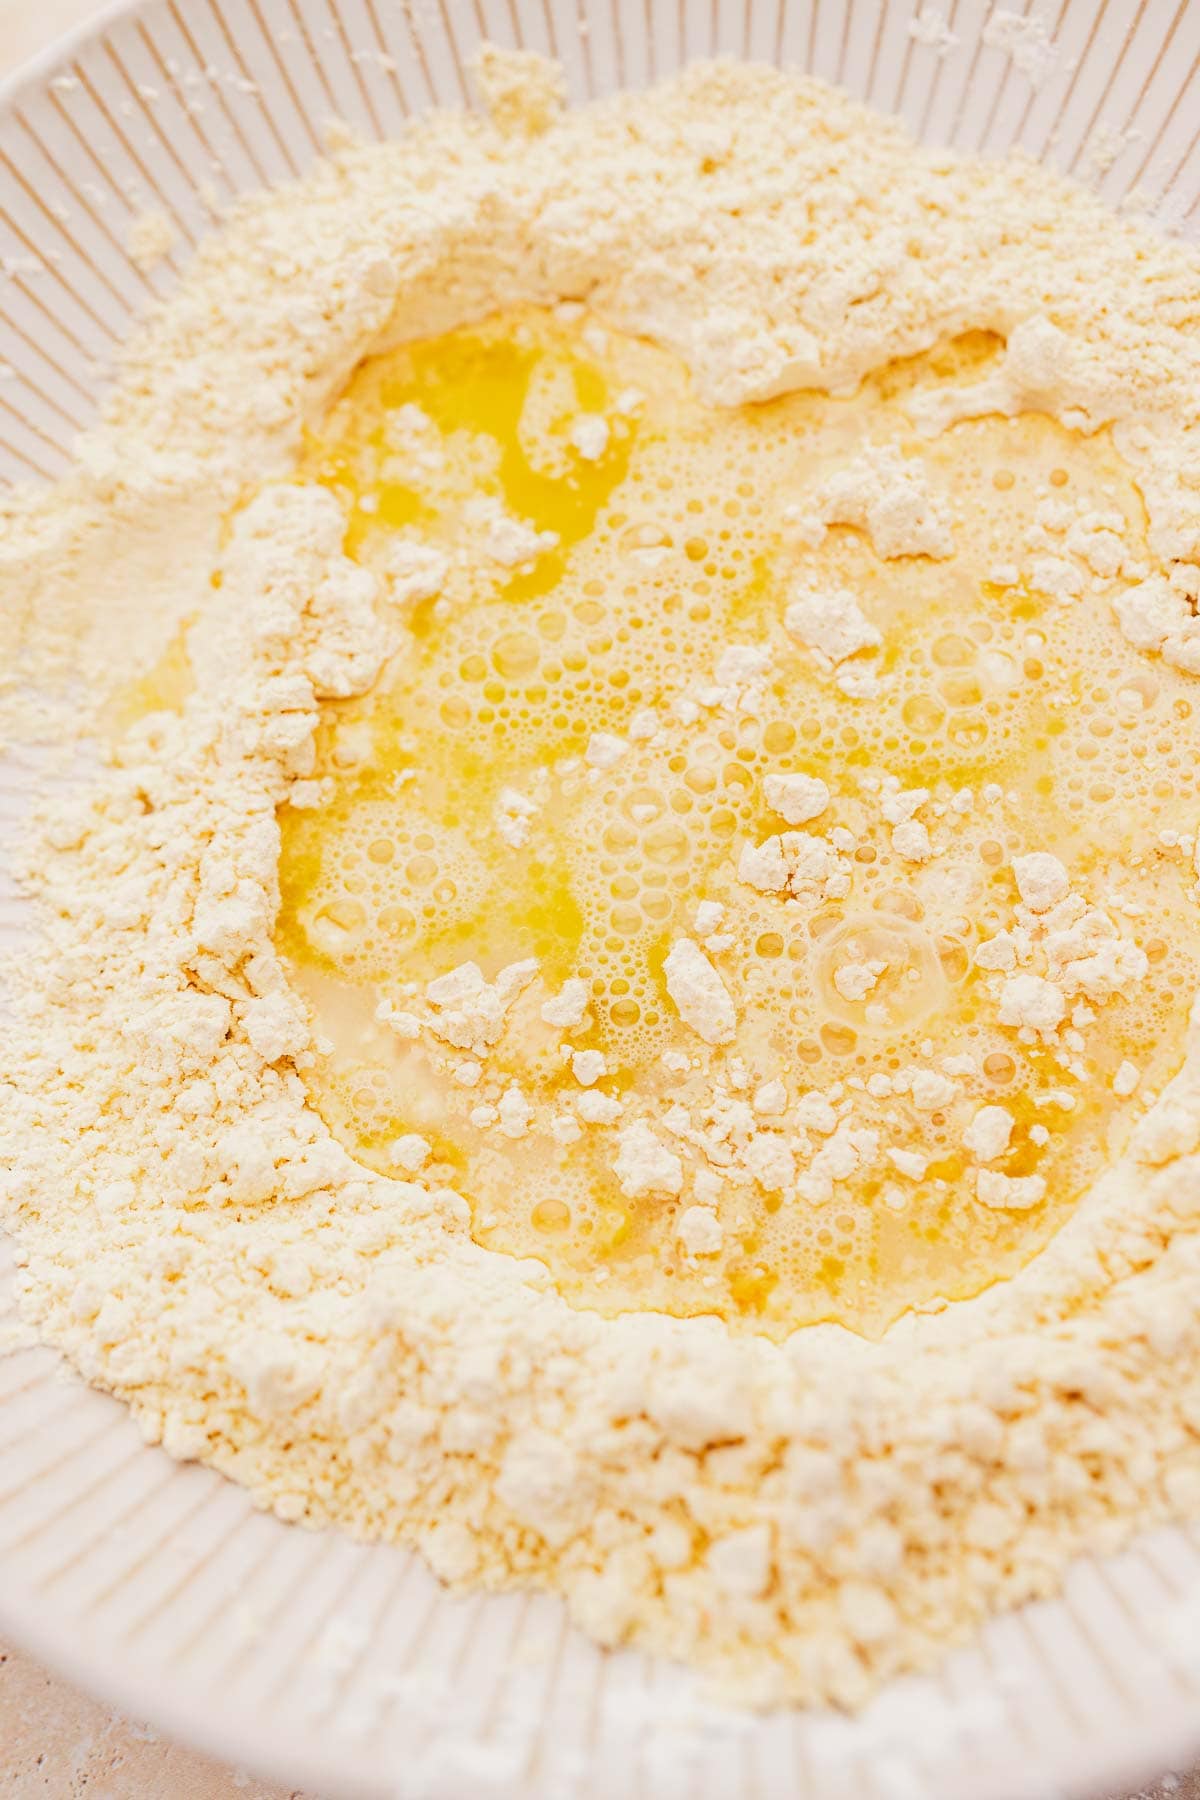 Melted butter mixing with chickpea flour in a white bowl, showing the beginning stages of pizza crust preparation.